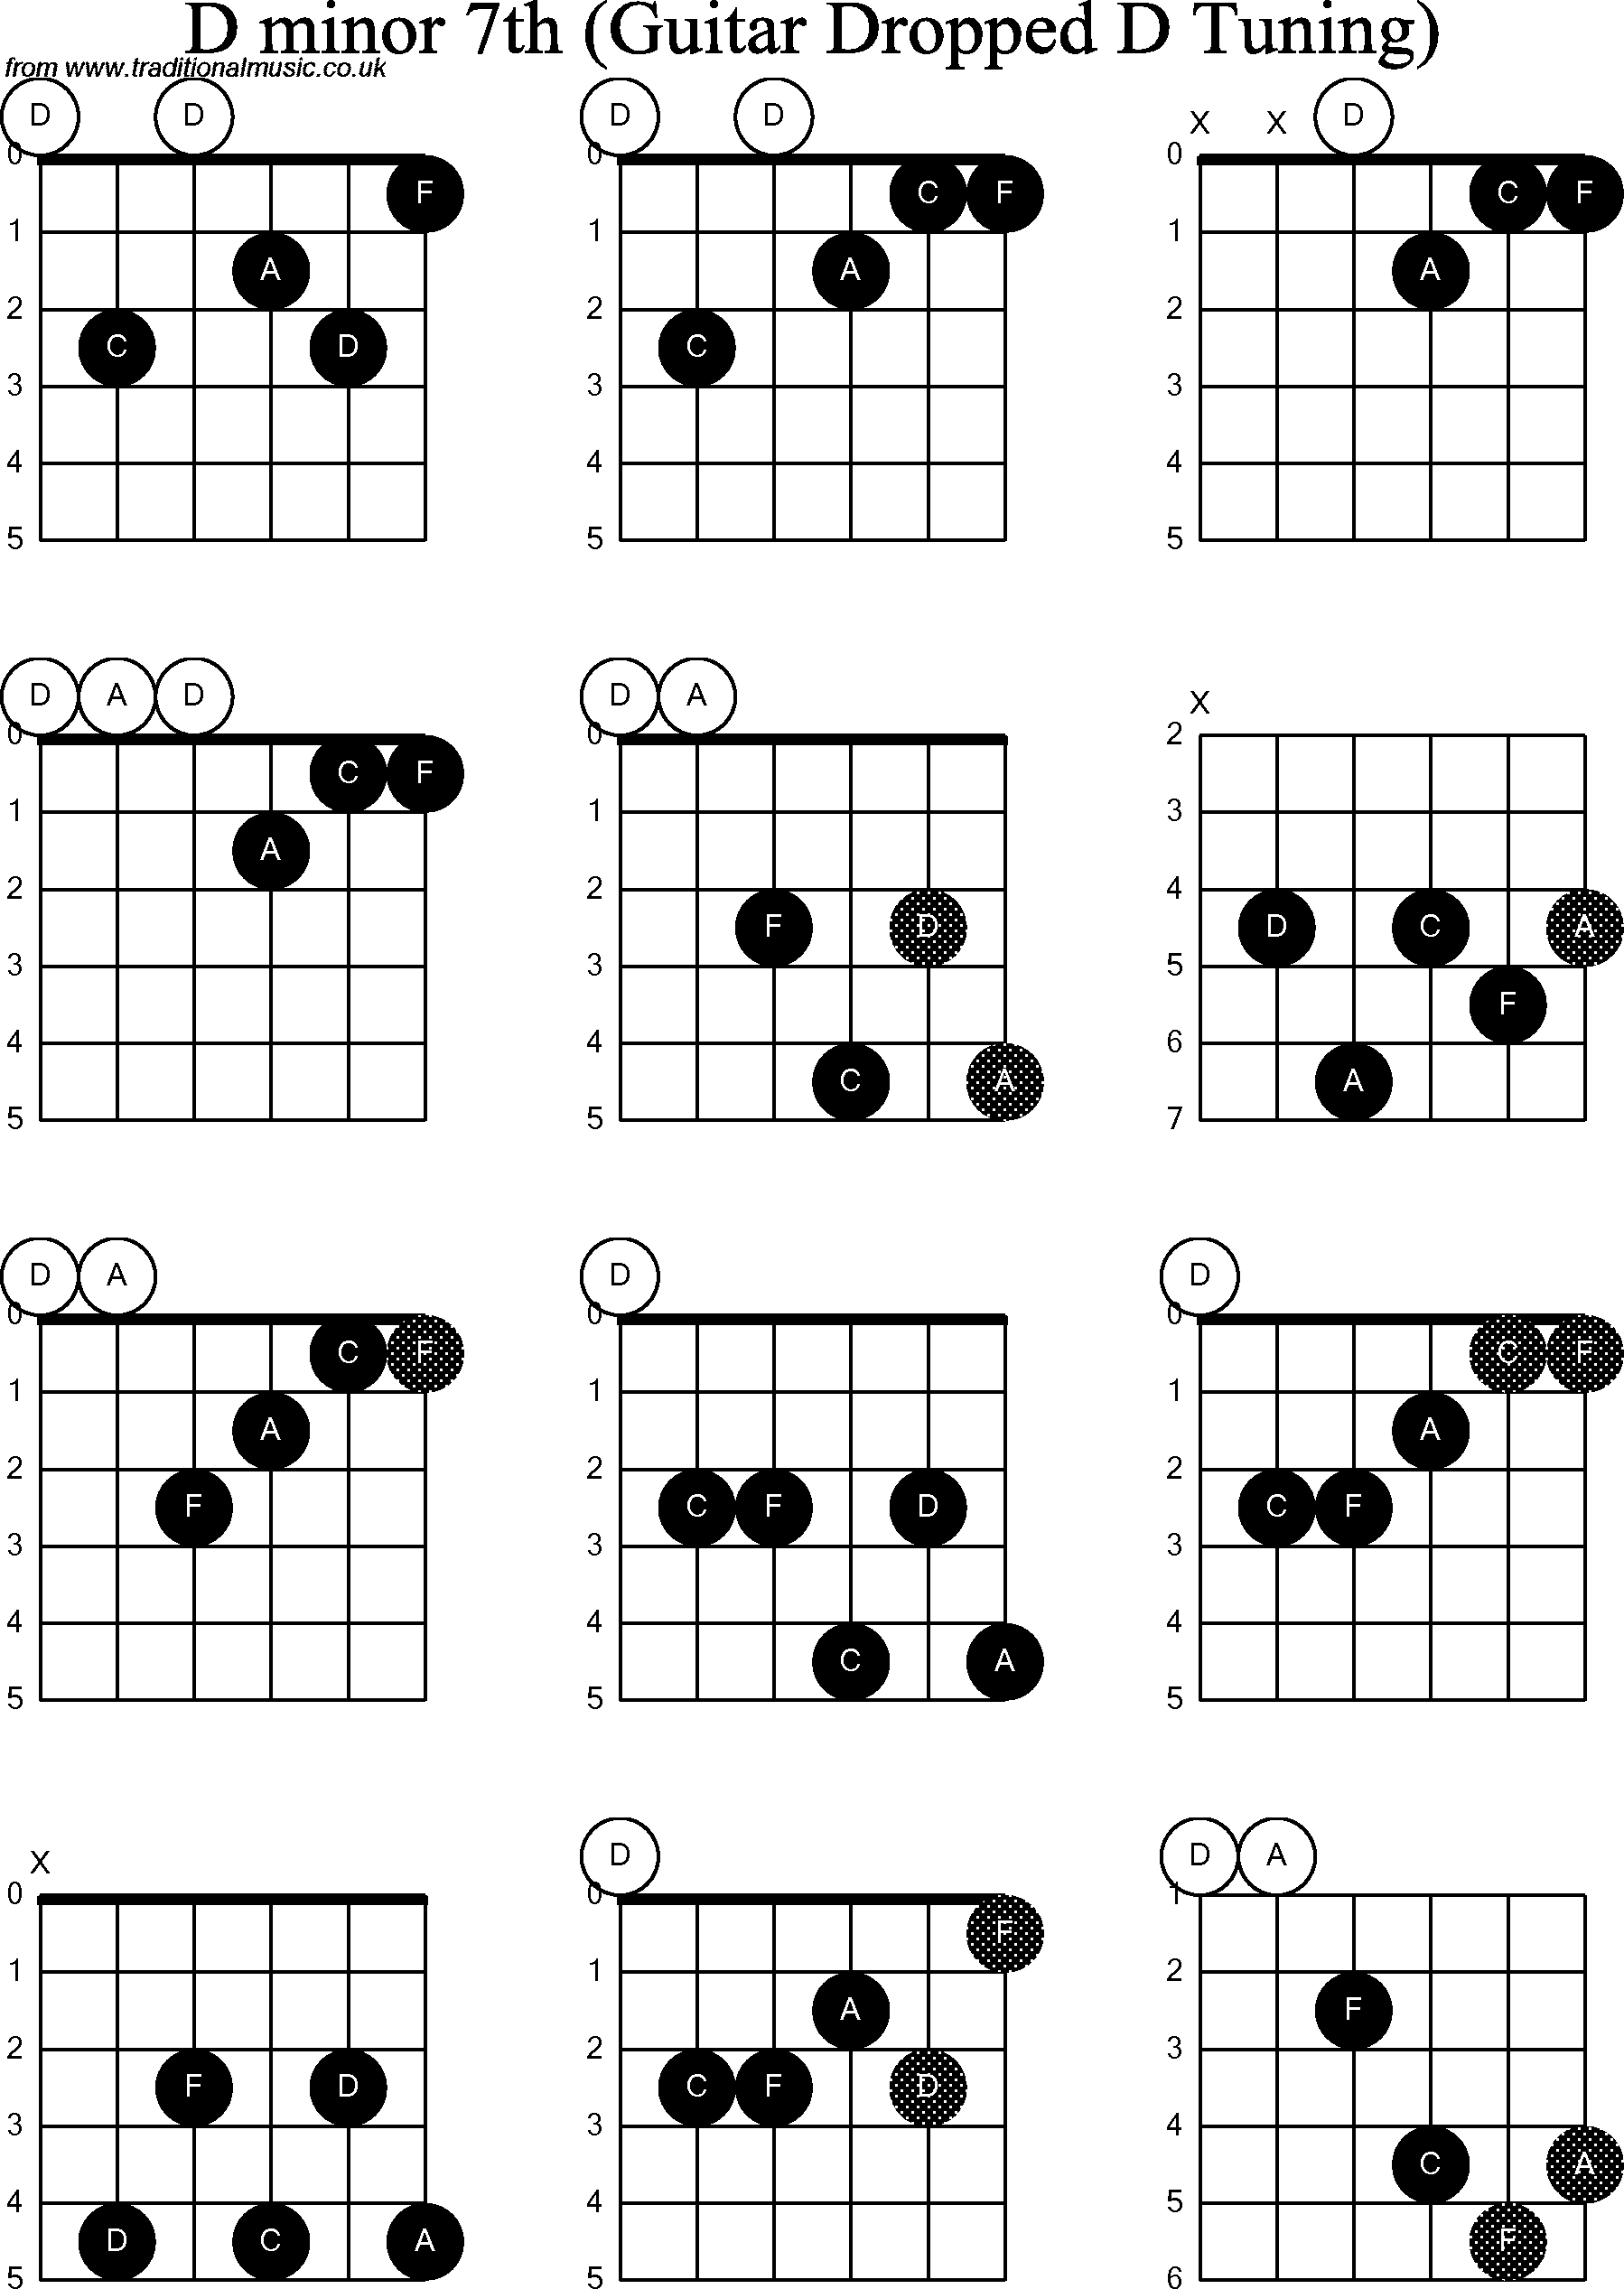 Chord diagrams for dropped D Guitar(DADGBE), D Minor7th